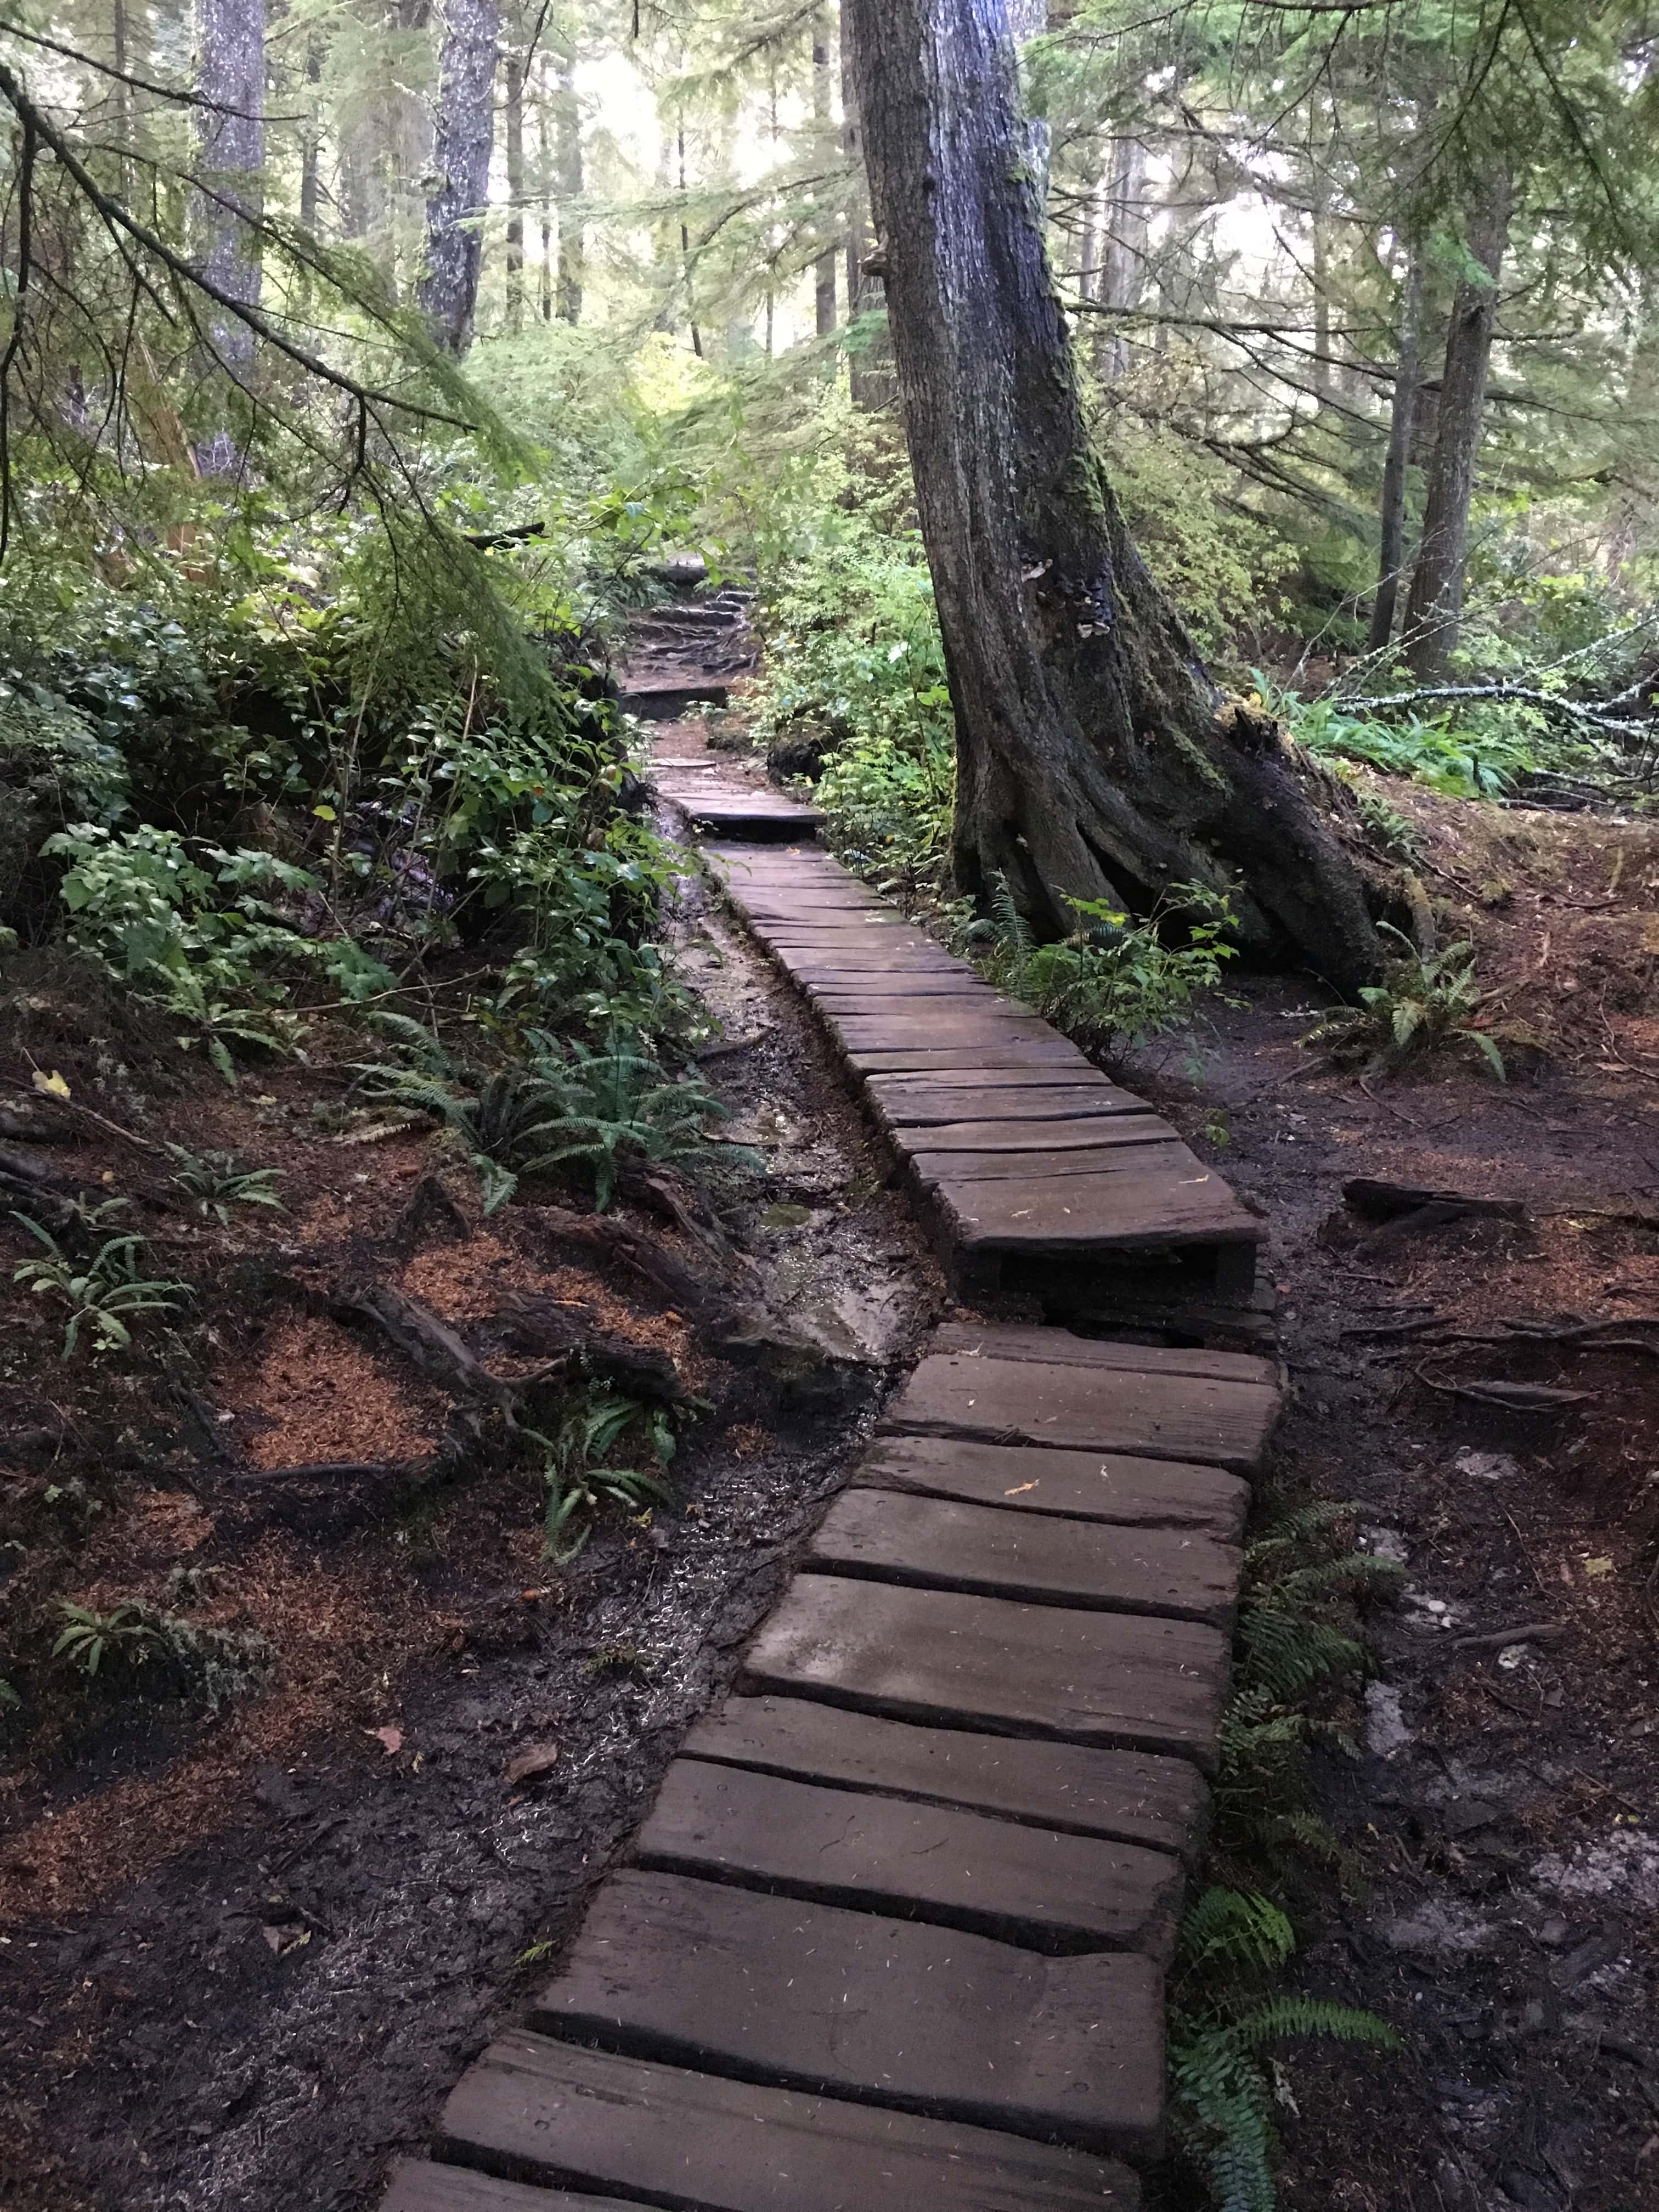 Cape Flattery Trail on the Makah Reservation in Washington